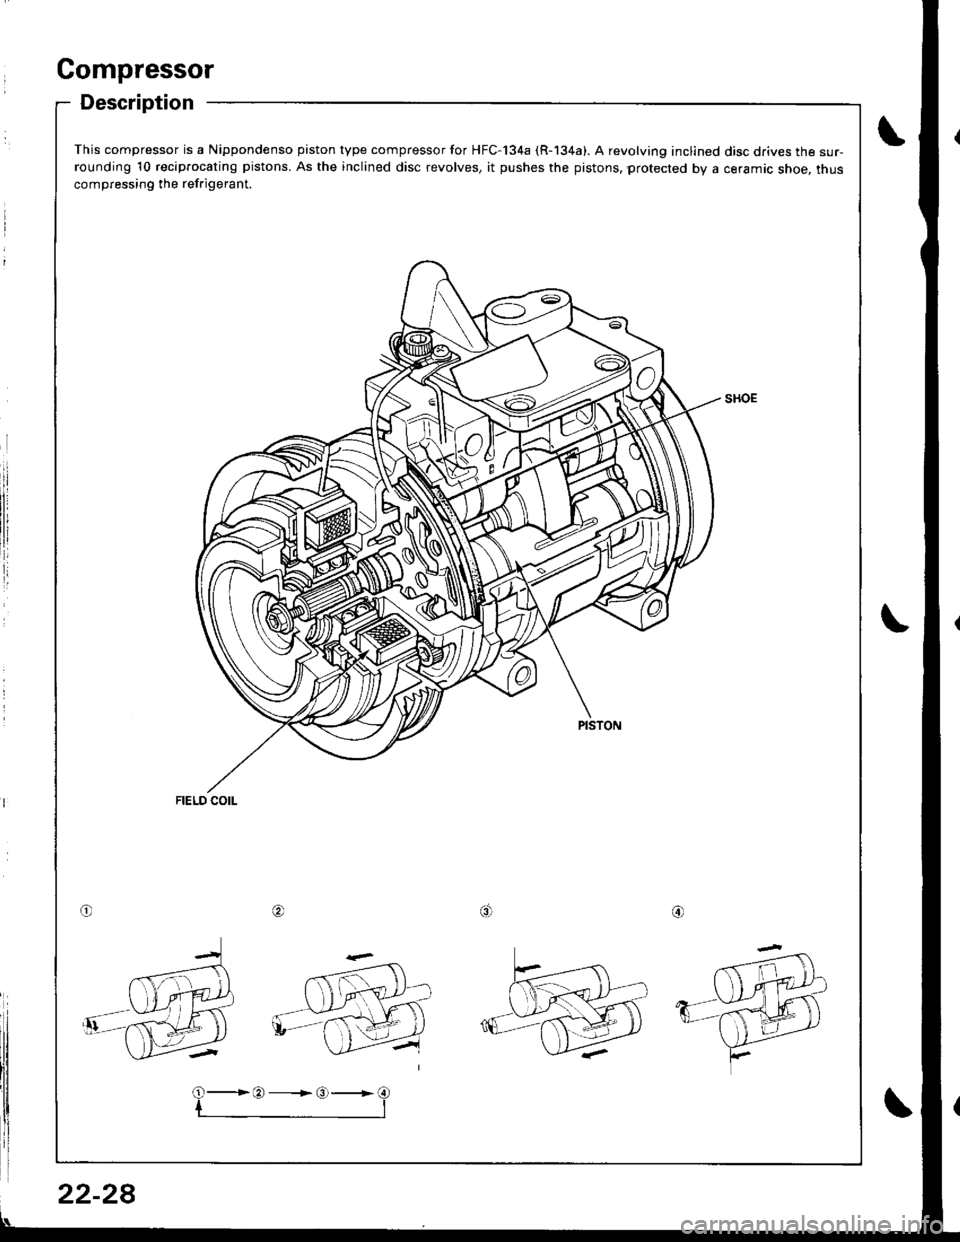 HONDA INTEGRA 1998 4.G Workshop Manual This compressor is a Nippondenso piston type compressor for HFC-134a (R-134a). A revolving inclined disc drives the sur-rounding 10 reciprocating pistons. As the inclined disc revolves, it pushes the 